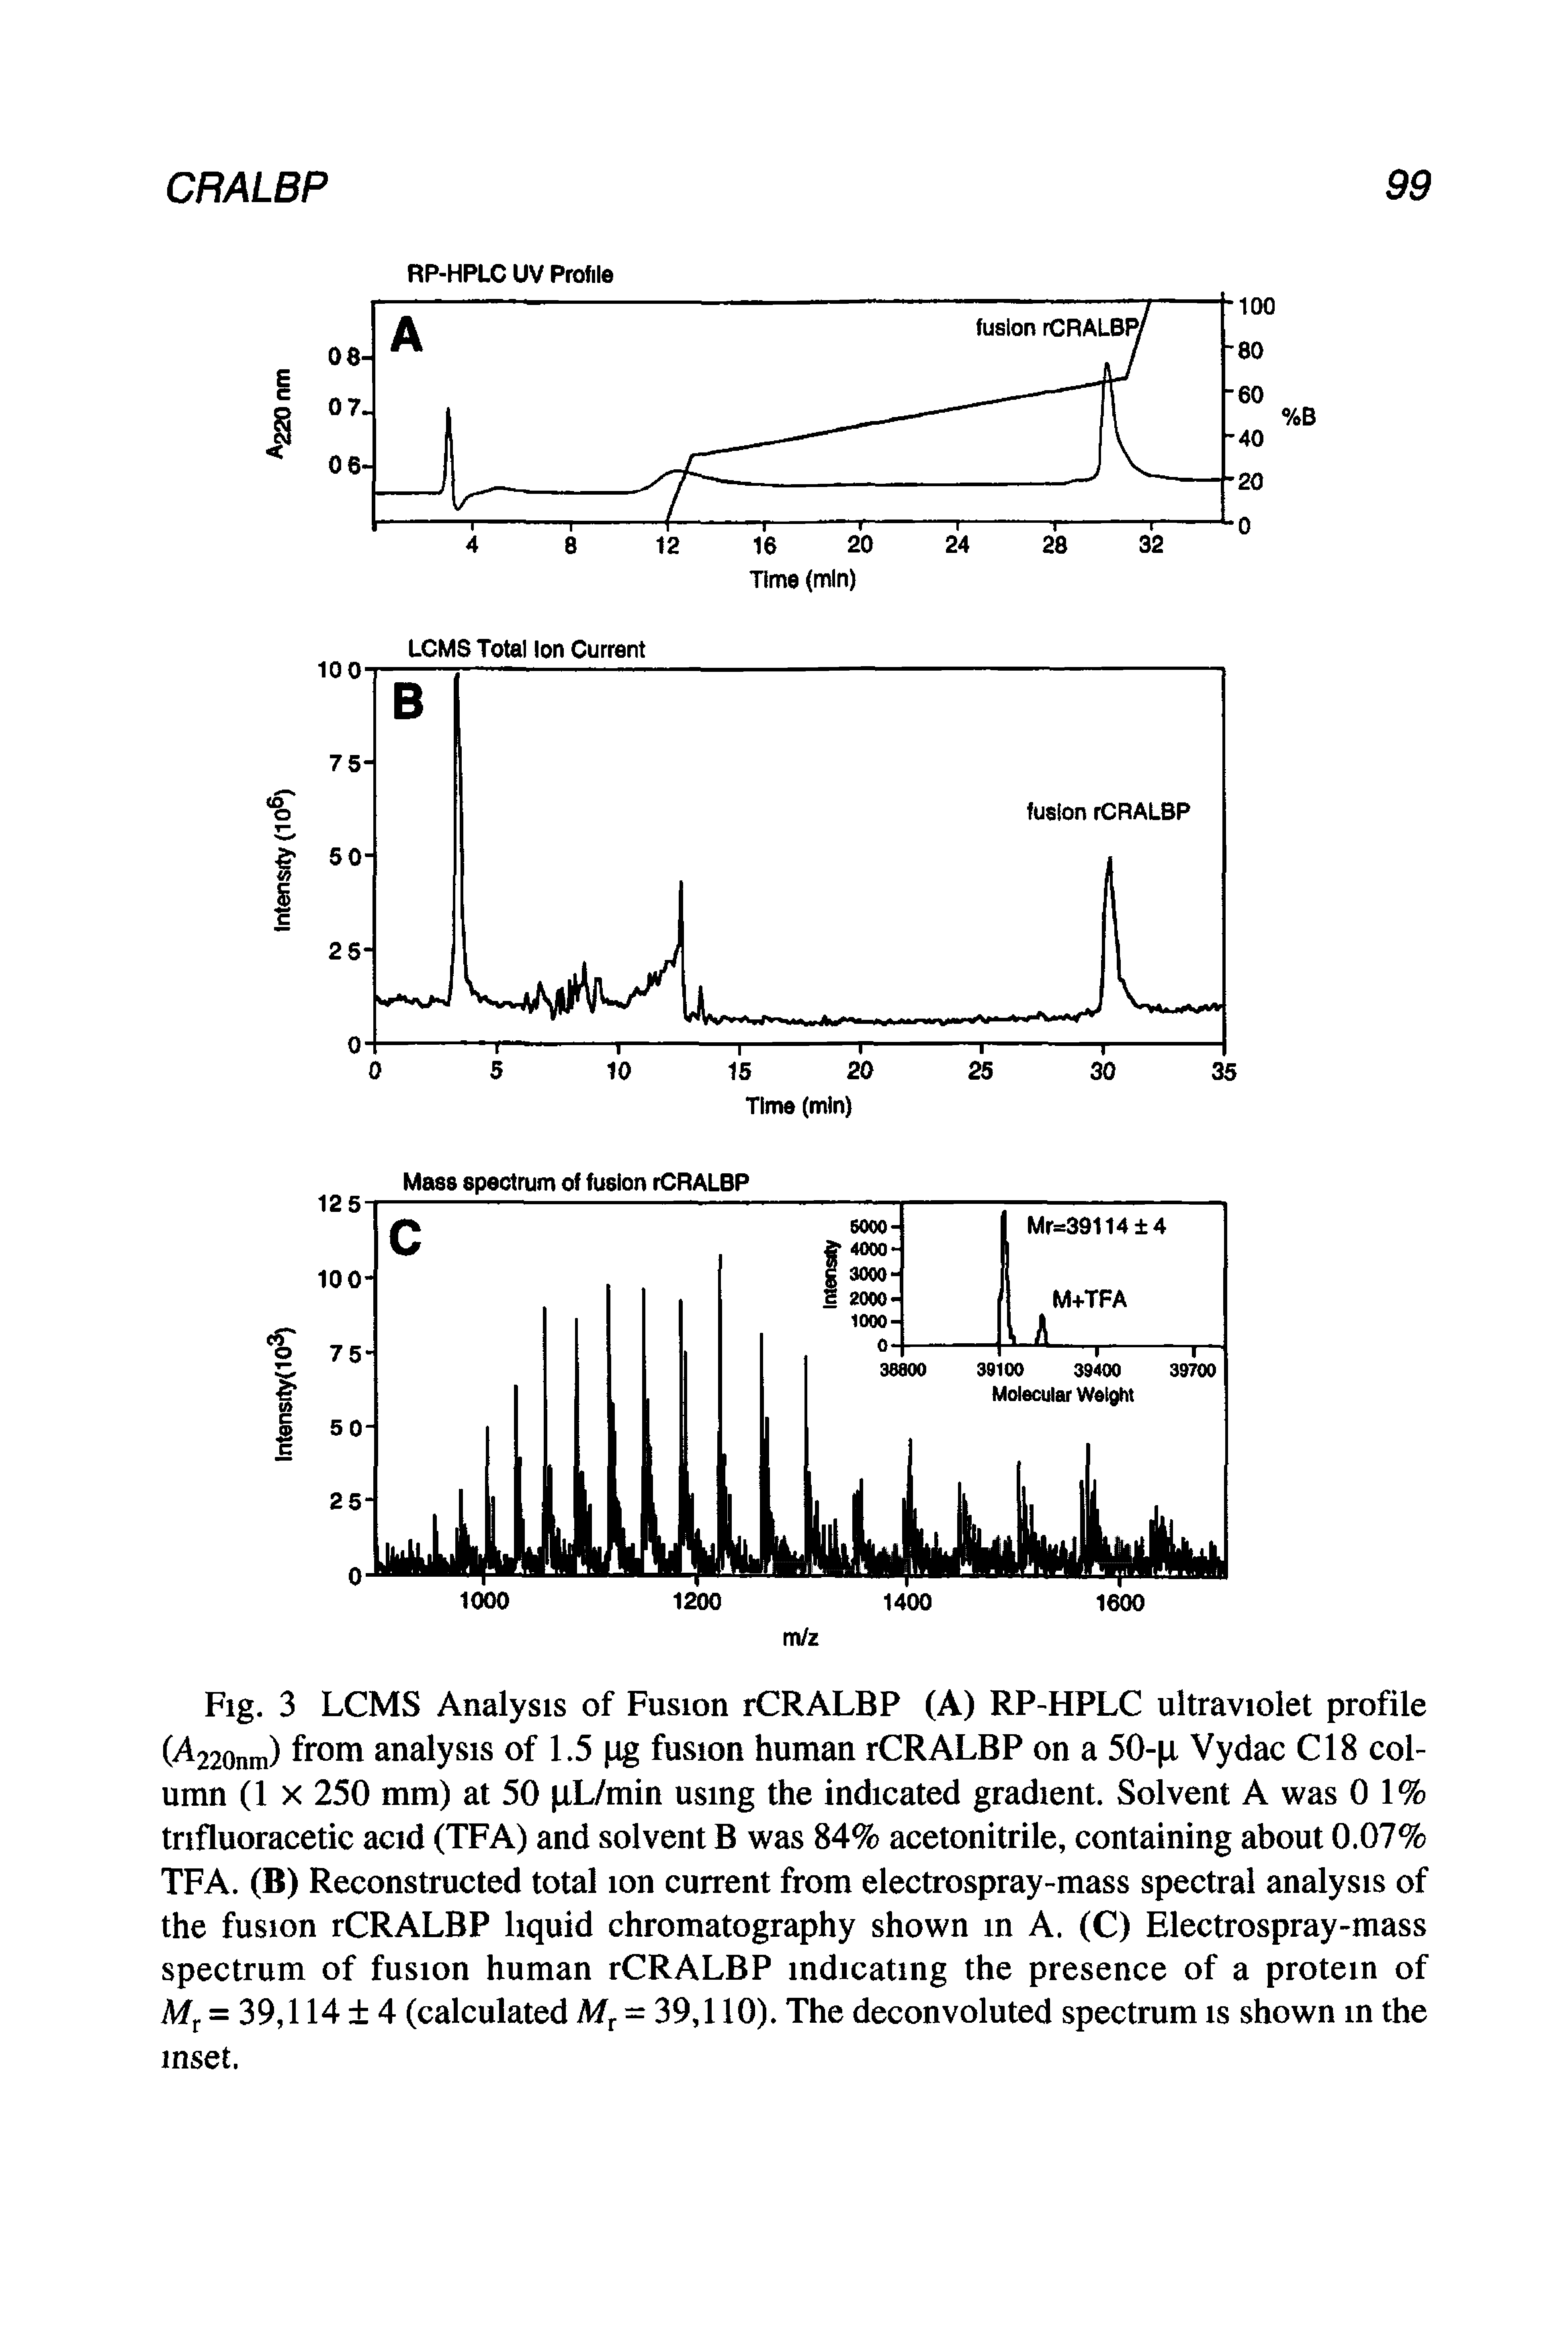 Fig. 3 LCMS Analysis of Fusion rCRALBP (A) RP-HPLC ultraviolet profile ( 220nm) froHi analysis of 1.5 (ig fusion human rCRALBP on a 50- X Vydac C18 column (lx 250 mm) at 50 lL/min usmg the indicated gradient. Solvent A was 0 1% trifluoracetic acid (TFA) and solvent B was 84% acetonitrile, containing about 0.07% TFA. (B) Reconstructed total ion current from electrospray-mass spectral analysis of the fusion rCRALBP liquid chromatography shown in A. (C) Electrospray-mass spectrum of fusion human rCRALBP indicating the presence of a protein of = 39,114 4 (calculated = 39,110). The deconvoluted spectrum is shown in the inset.